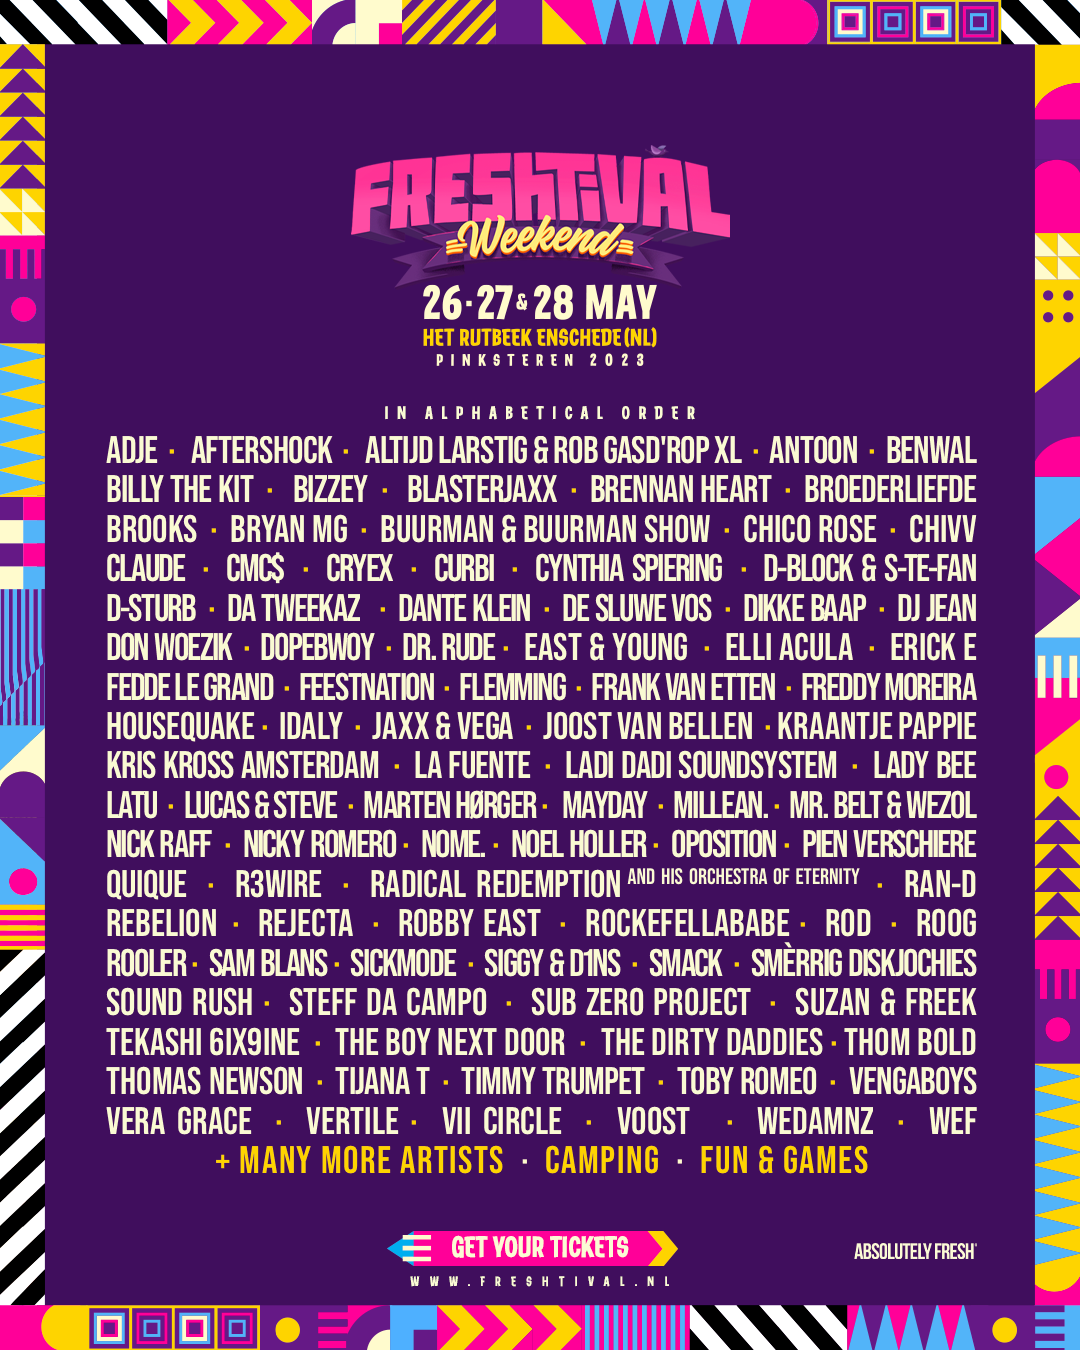 The full line up of Freshtival Weekend 2023